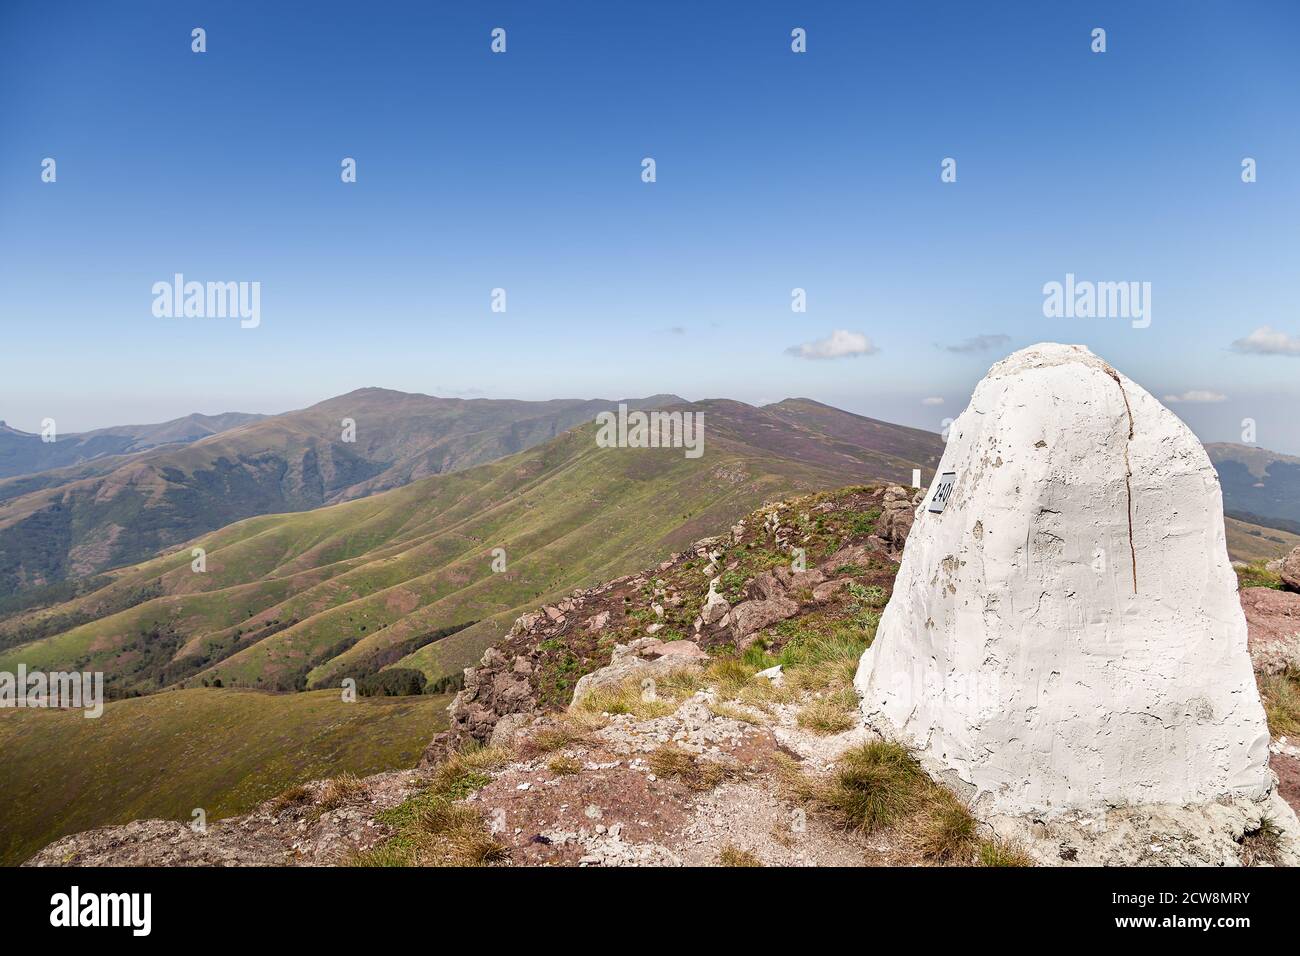 Epic view from Devil's head (Vrazja glava) peak on Balkan mountains (Stara planina) in Serbia of a rolling hills and distant Midzor summit Stock Photo